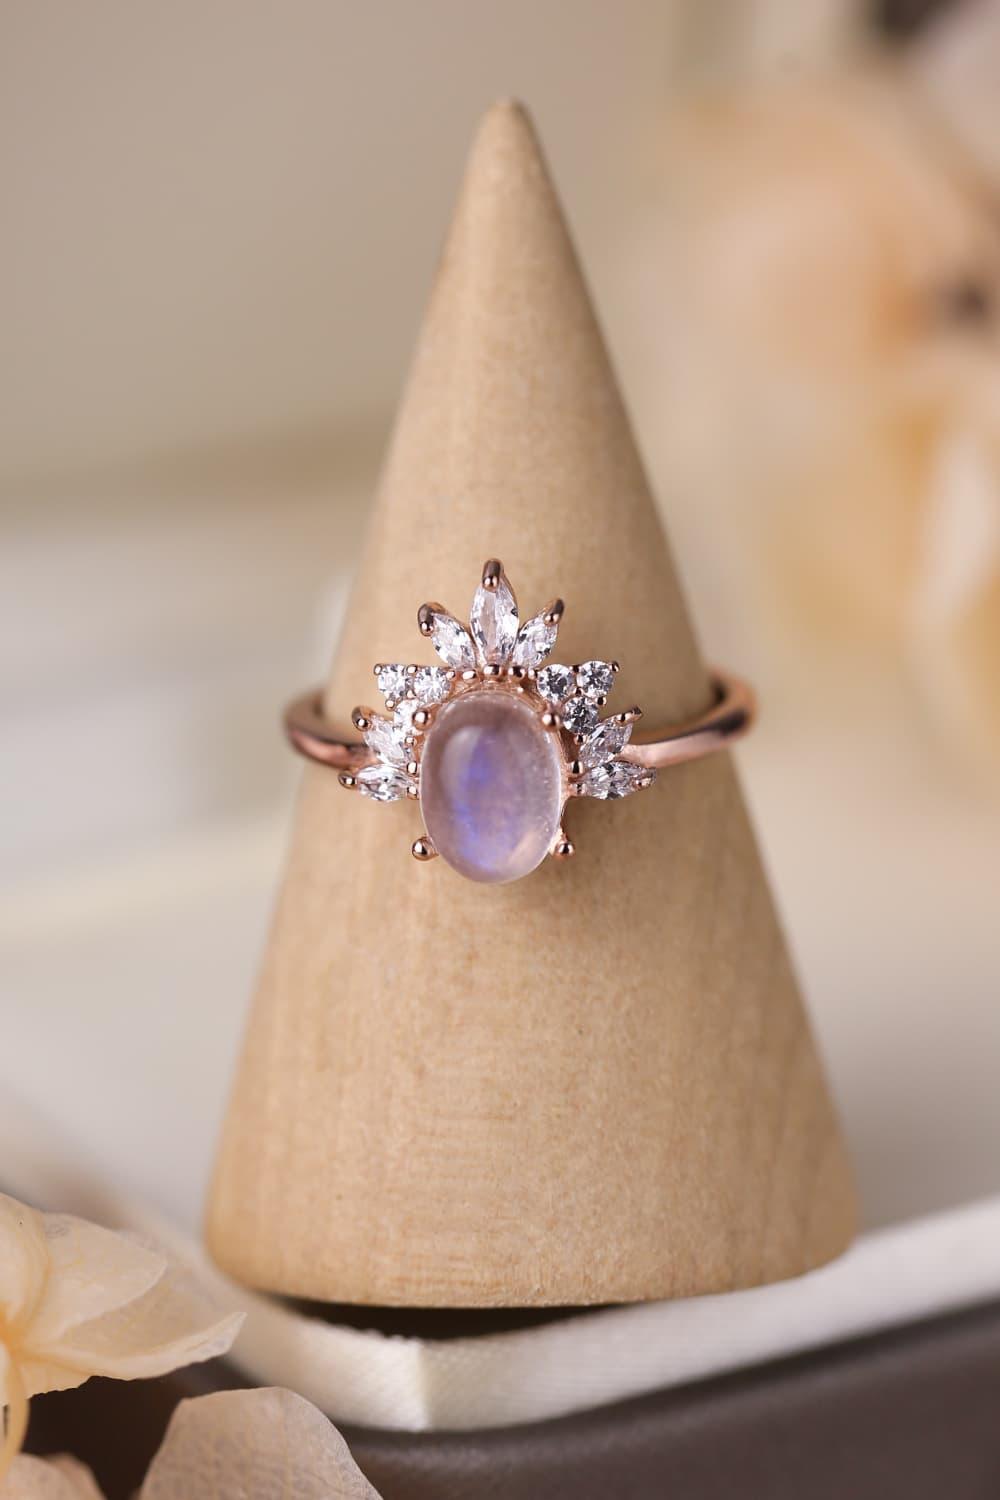 Spectacle Sterling Silver Moonstone Ring - MXSTUDIO.COM